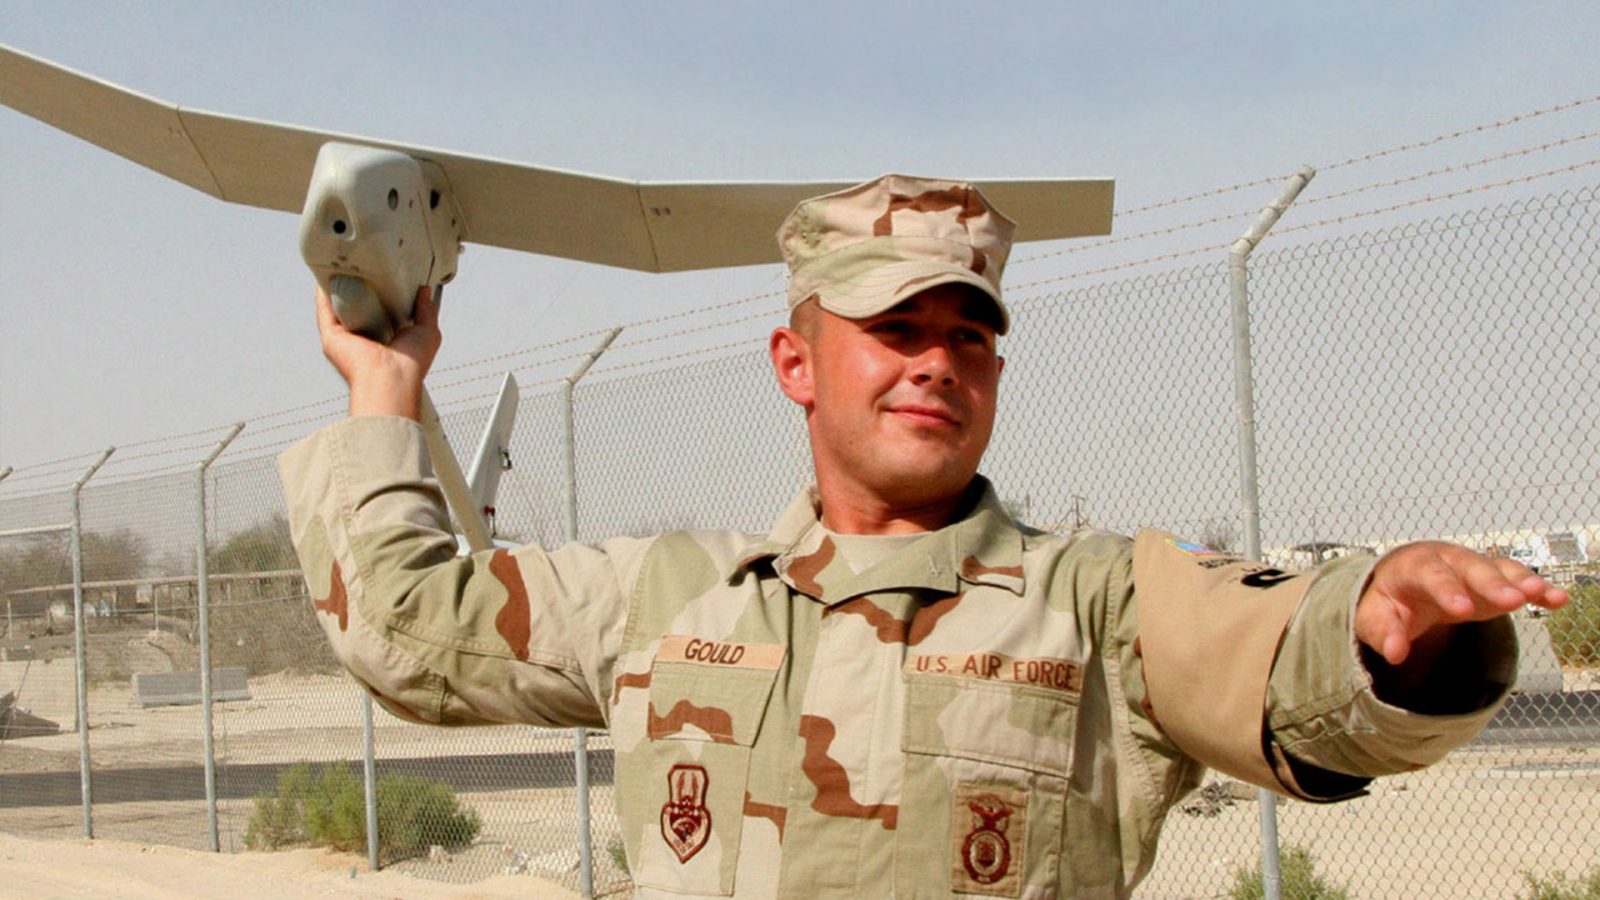 Drone school created to teach young US Army soldiers